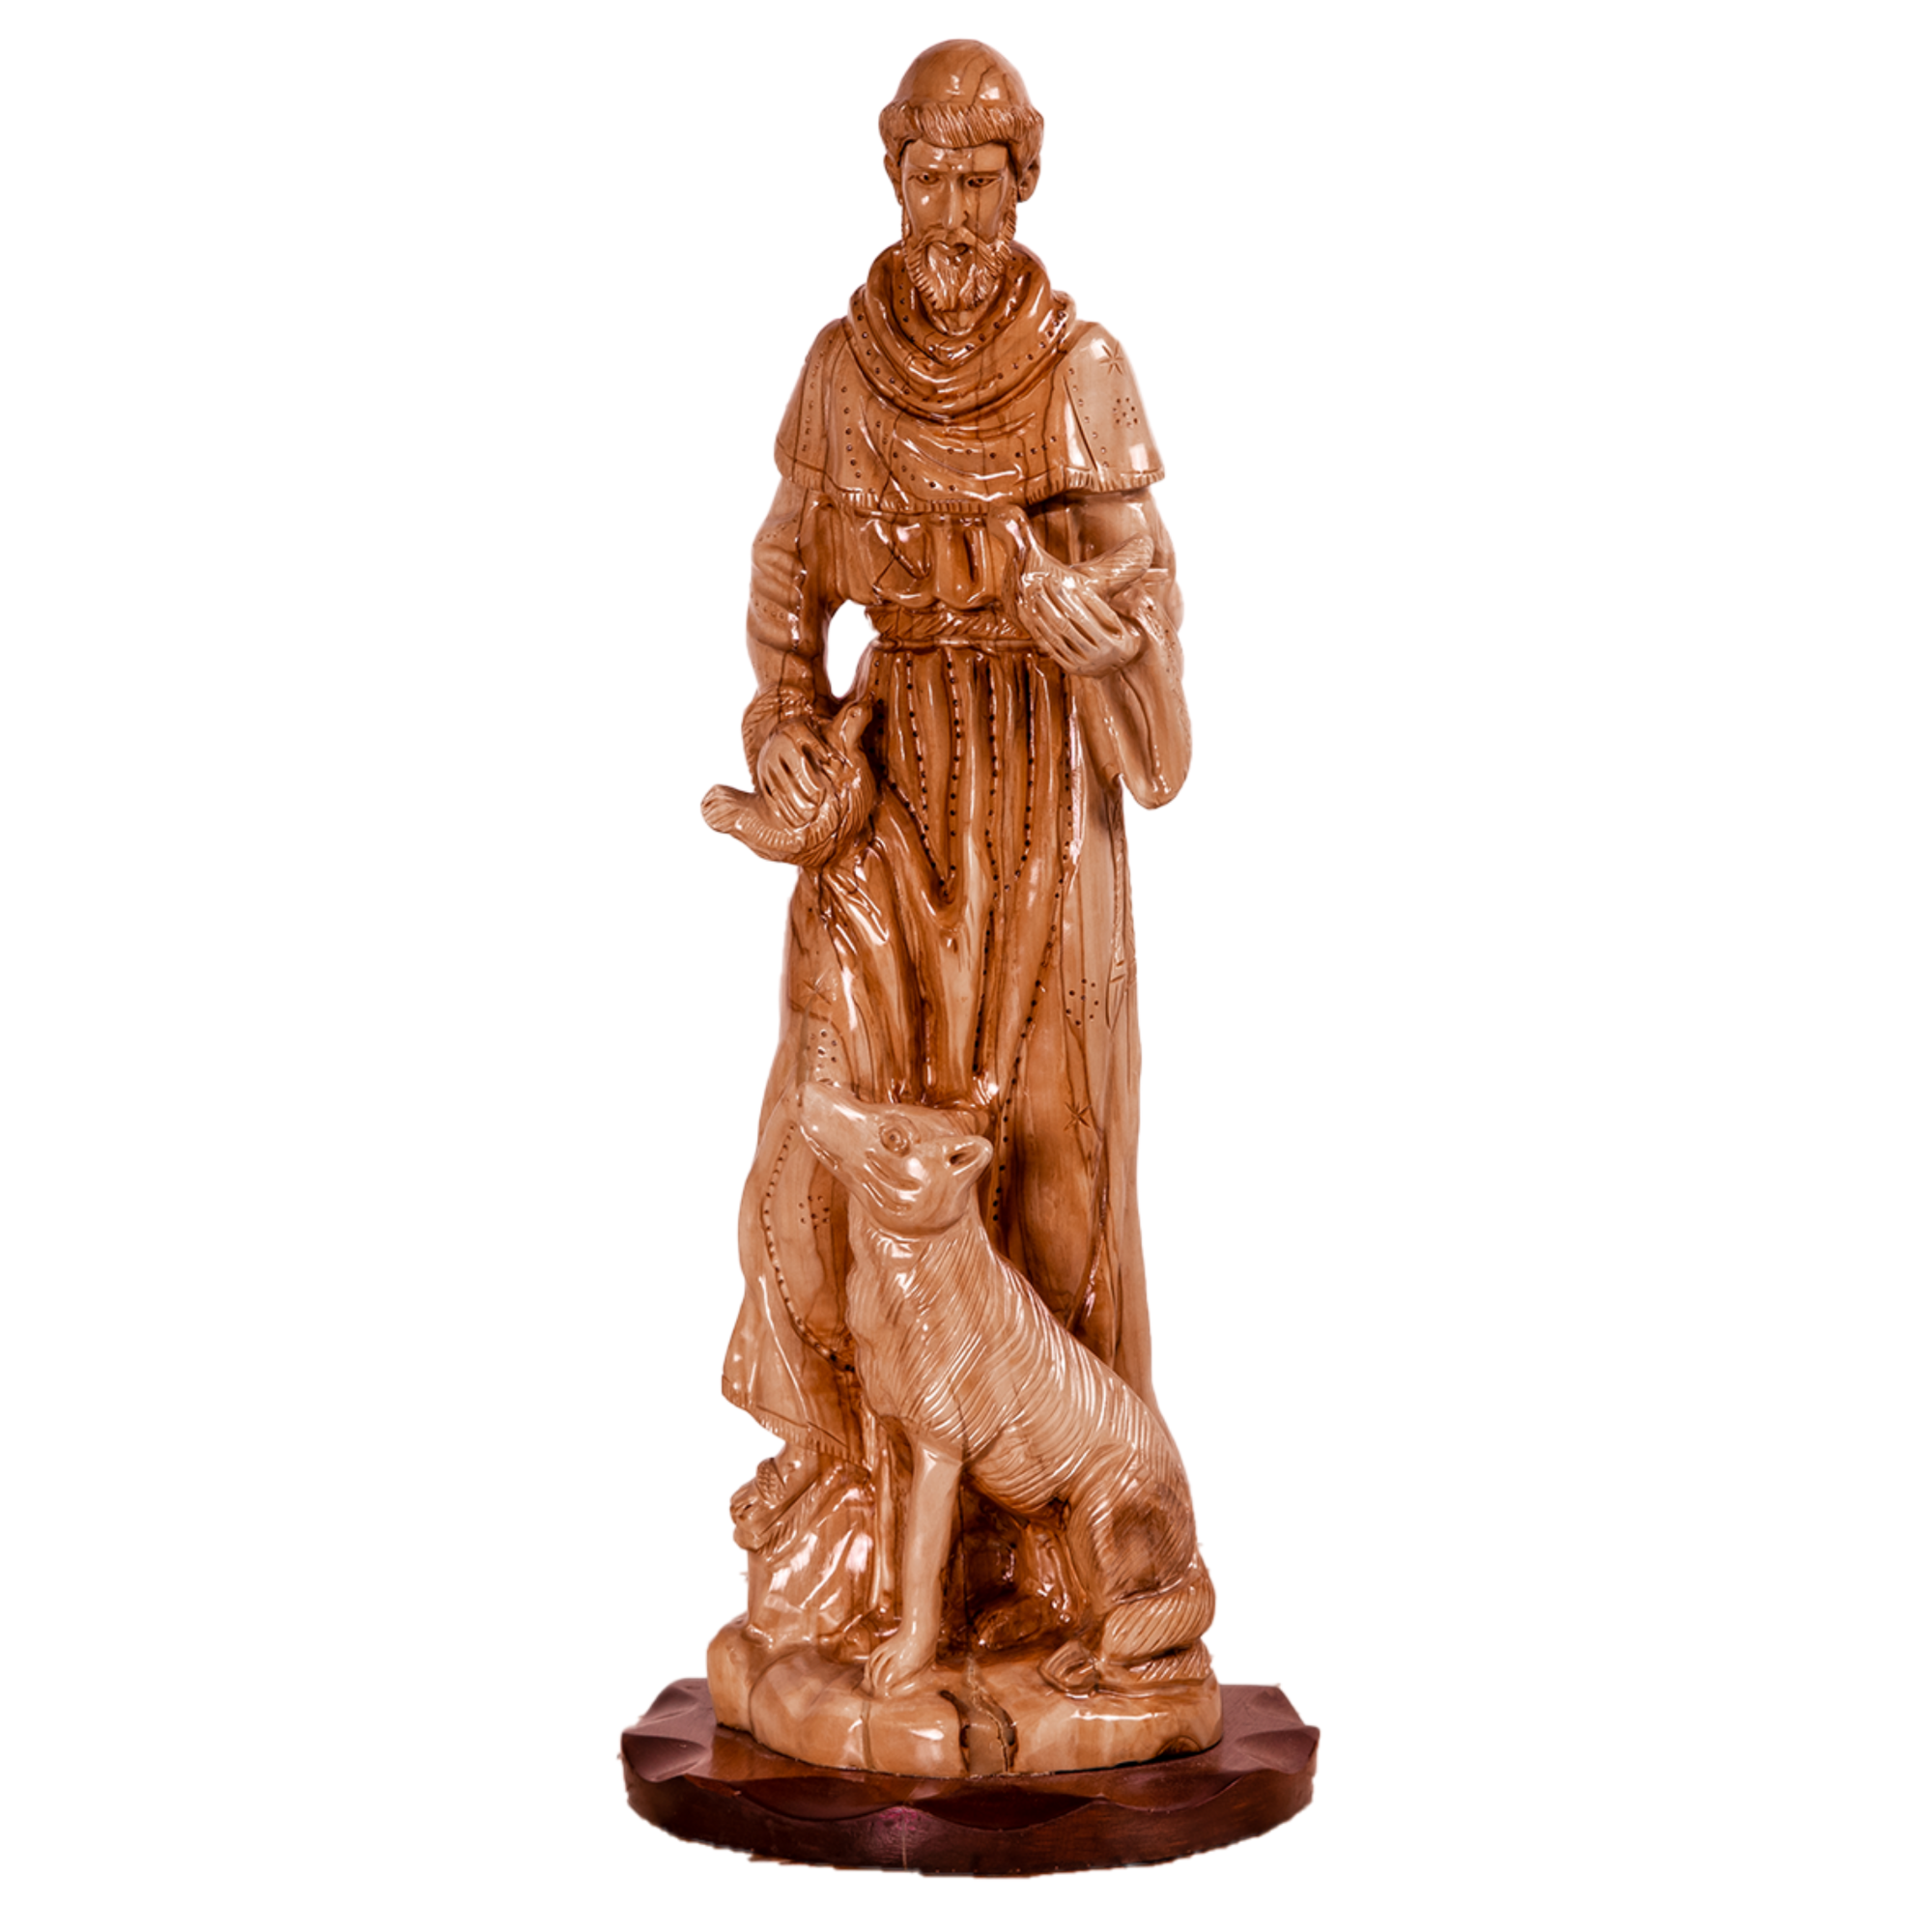 St. Francis with the animals, Size: 8" x 8" x 19.5"